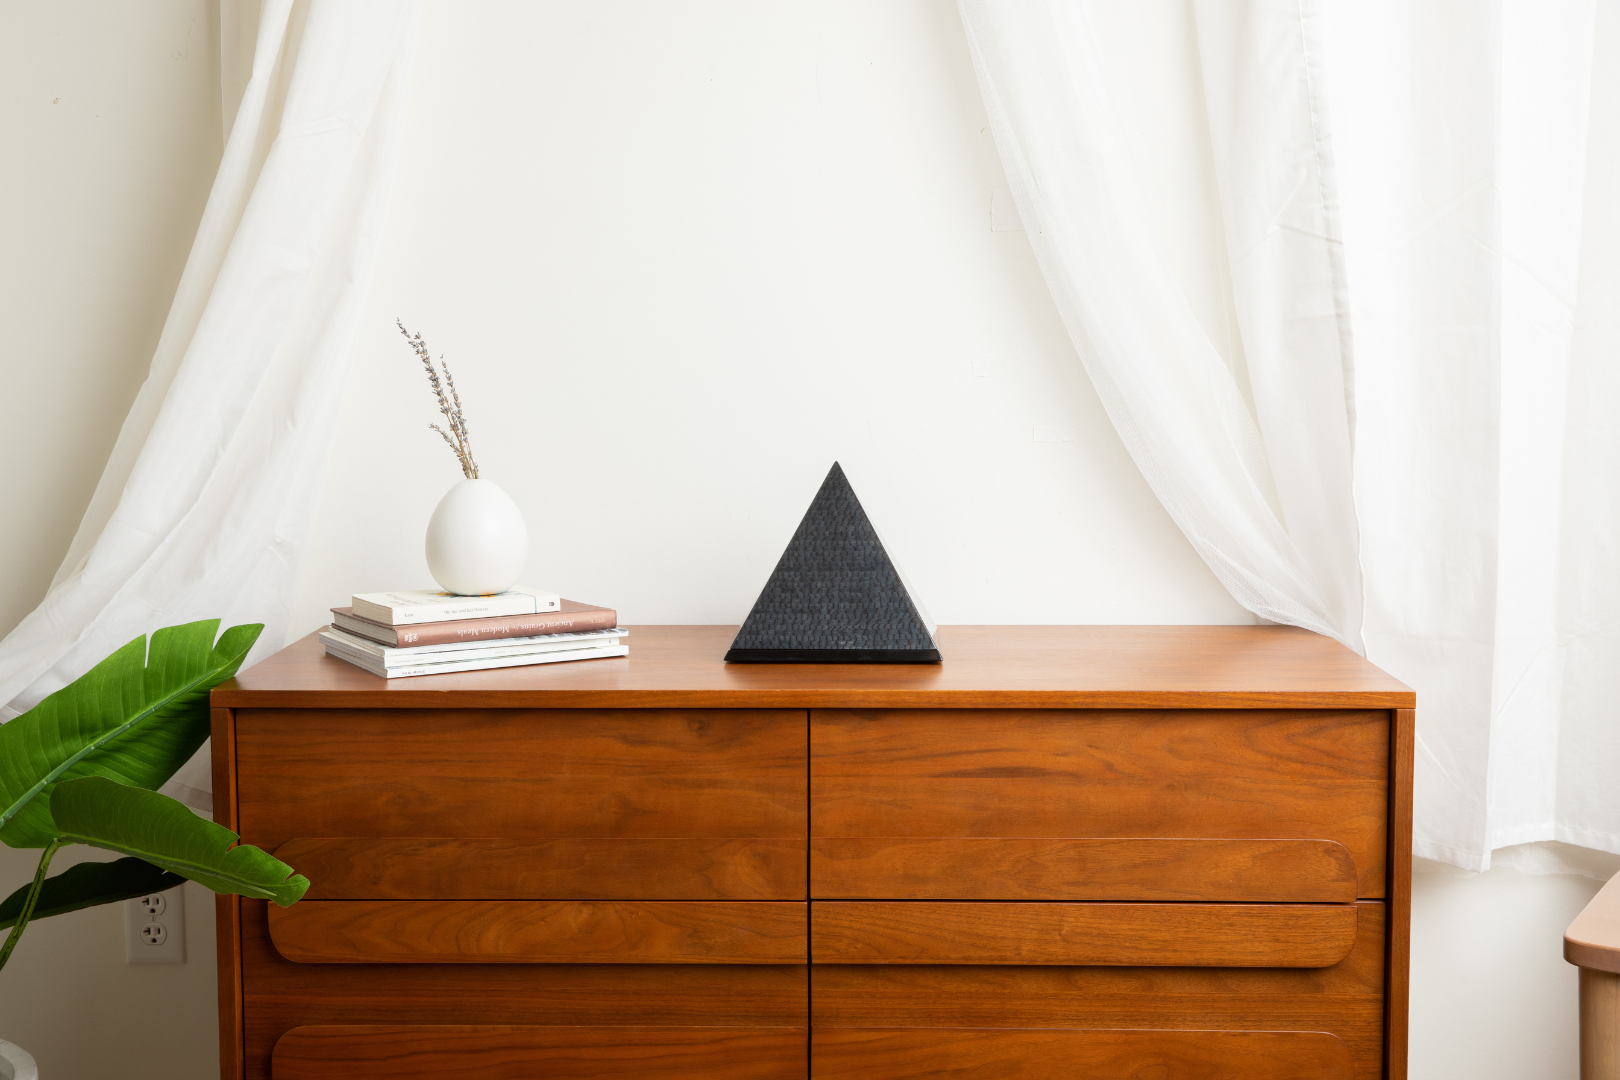 The Pyramid Urn in Navy